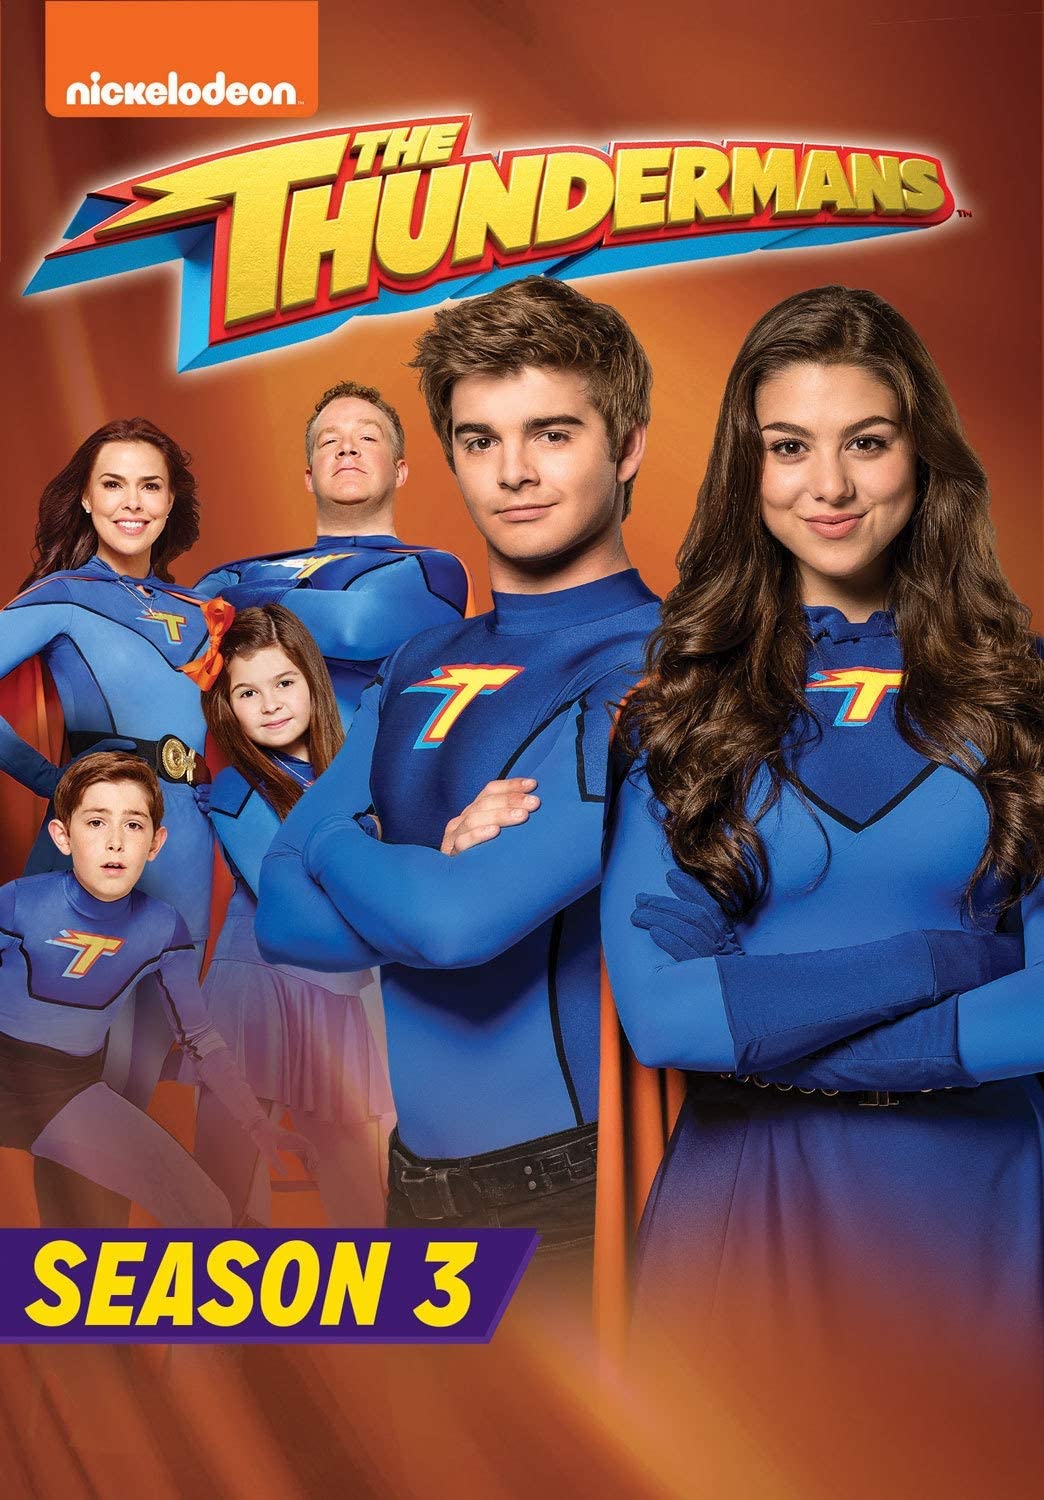 What Kira Kosarin Has Been Up To Since The Thundermans Ended